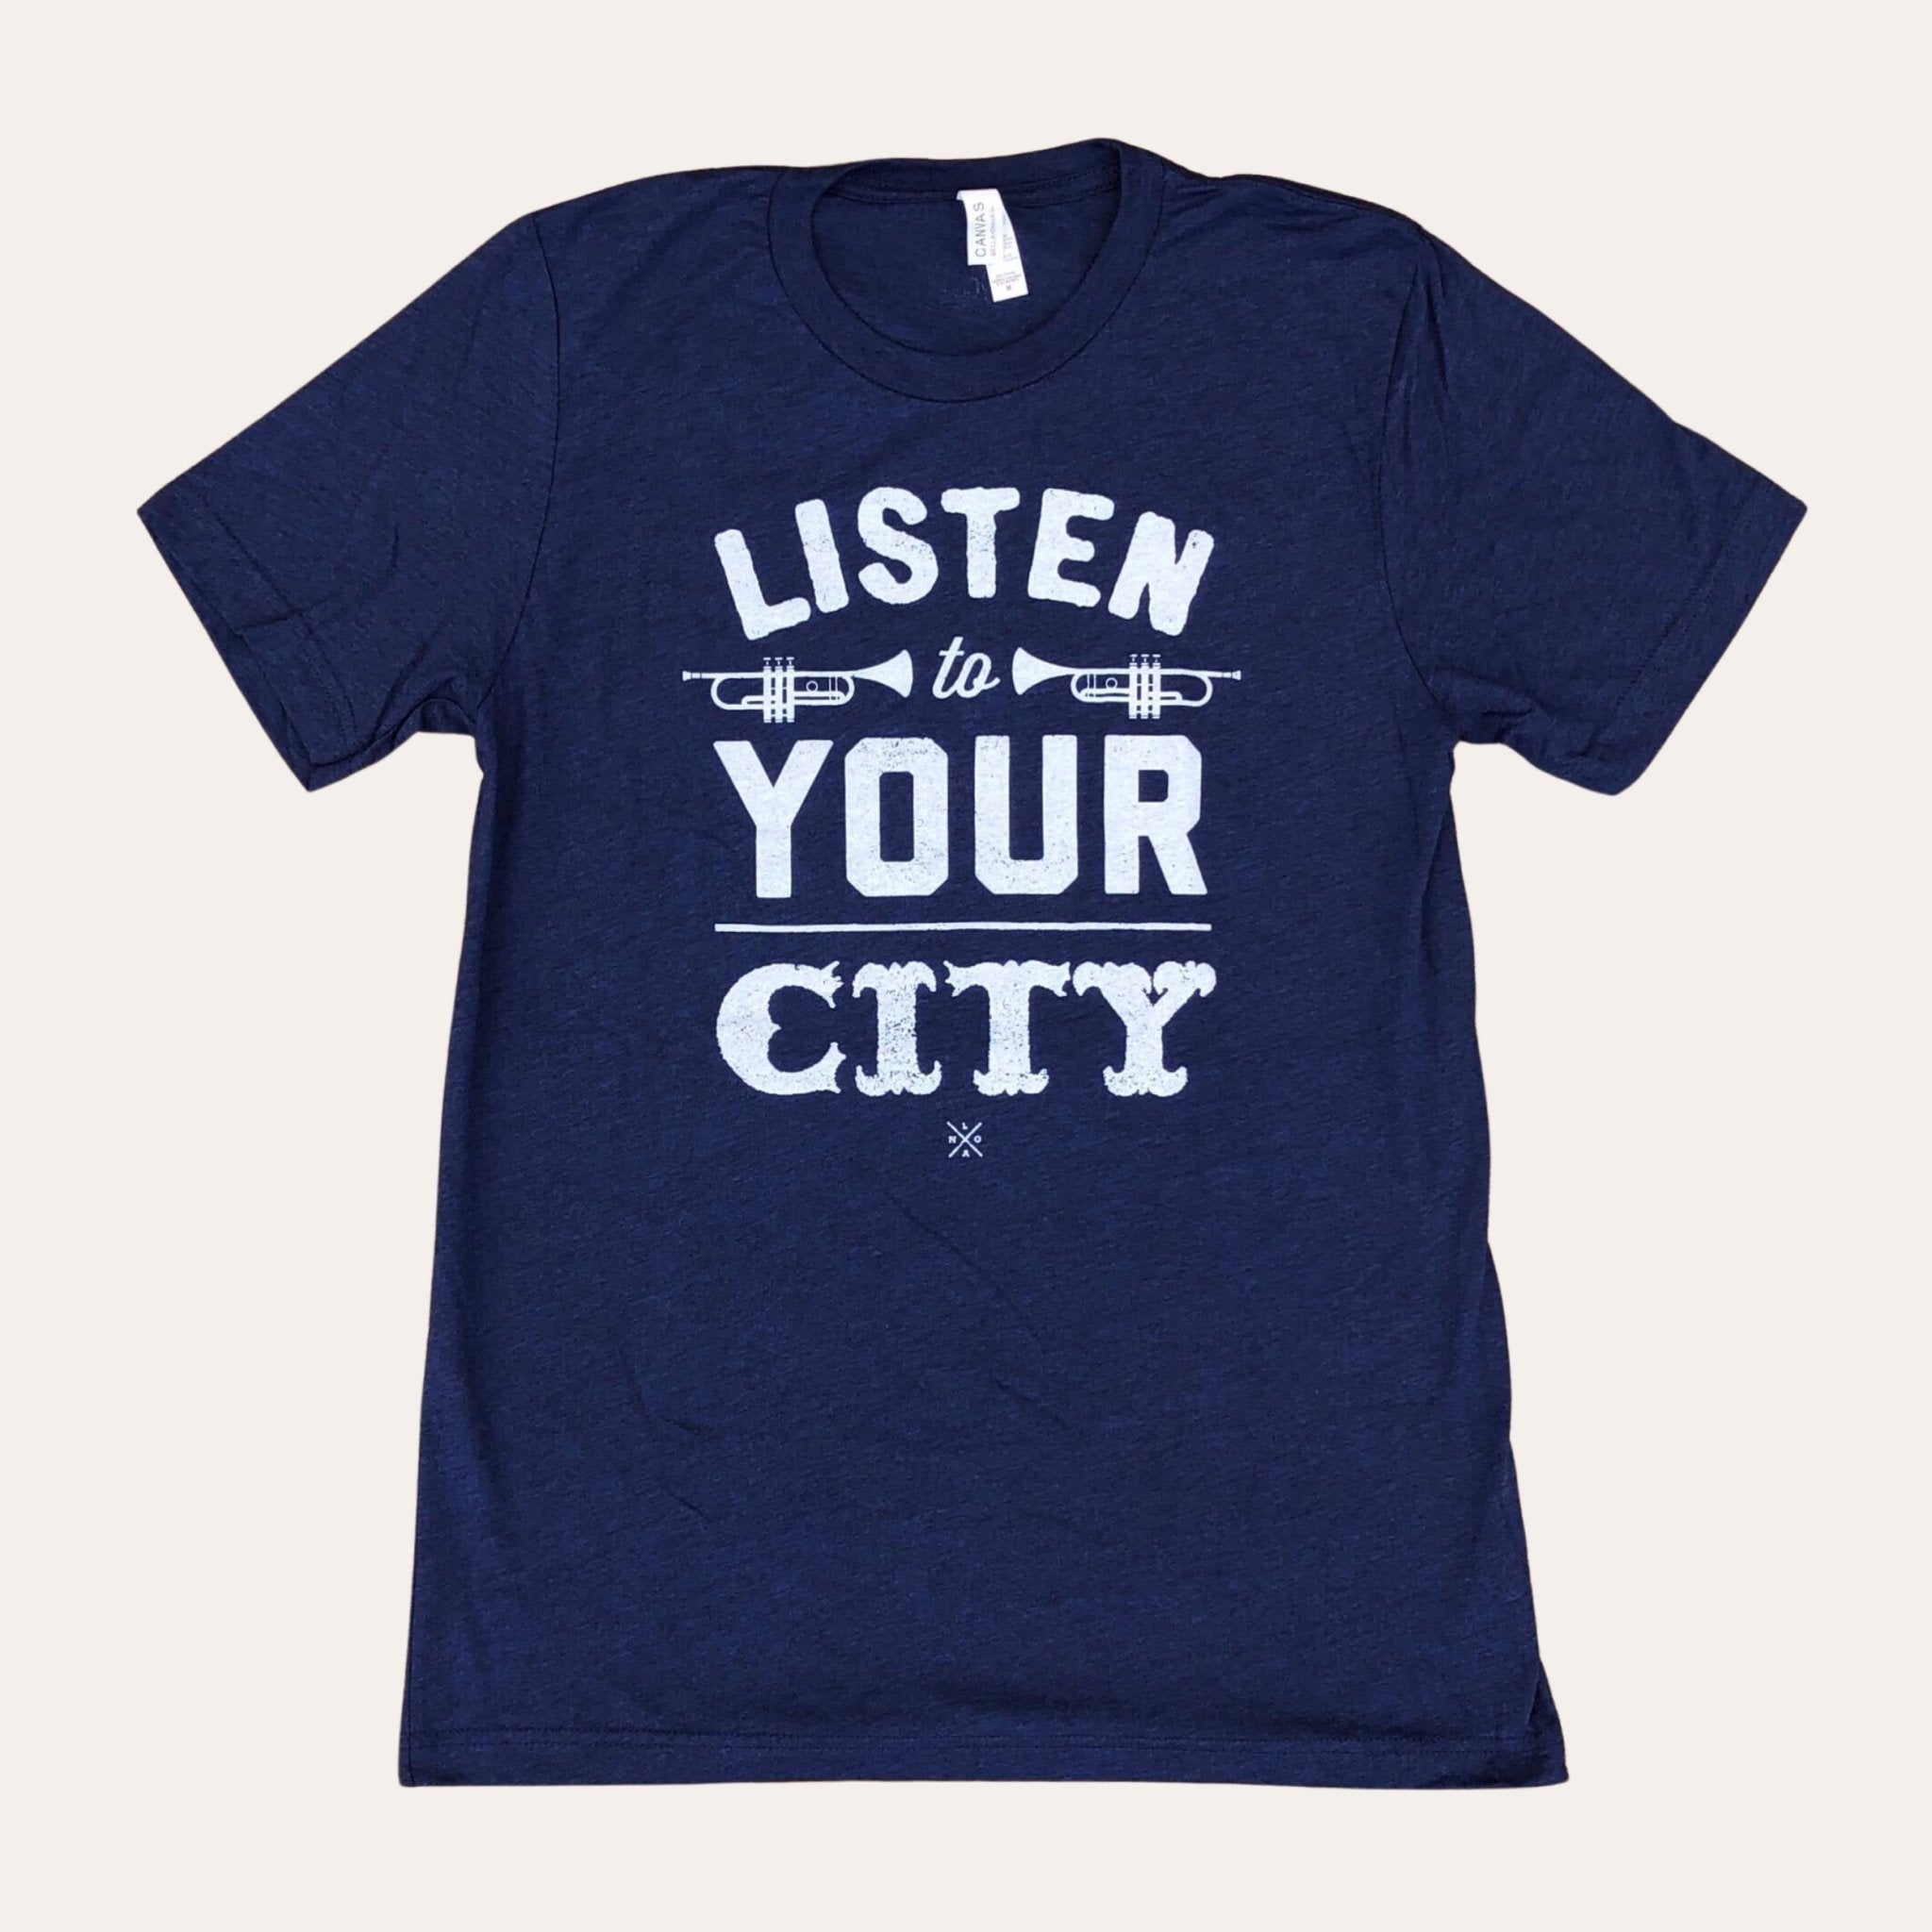 Listen To Your City - Dirty Coast Press